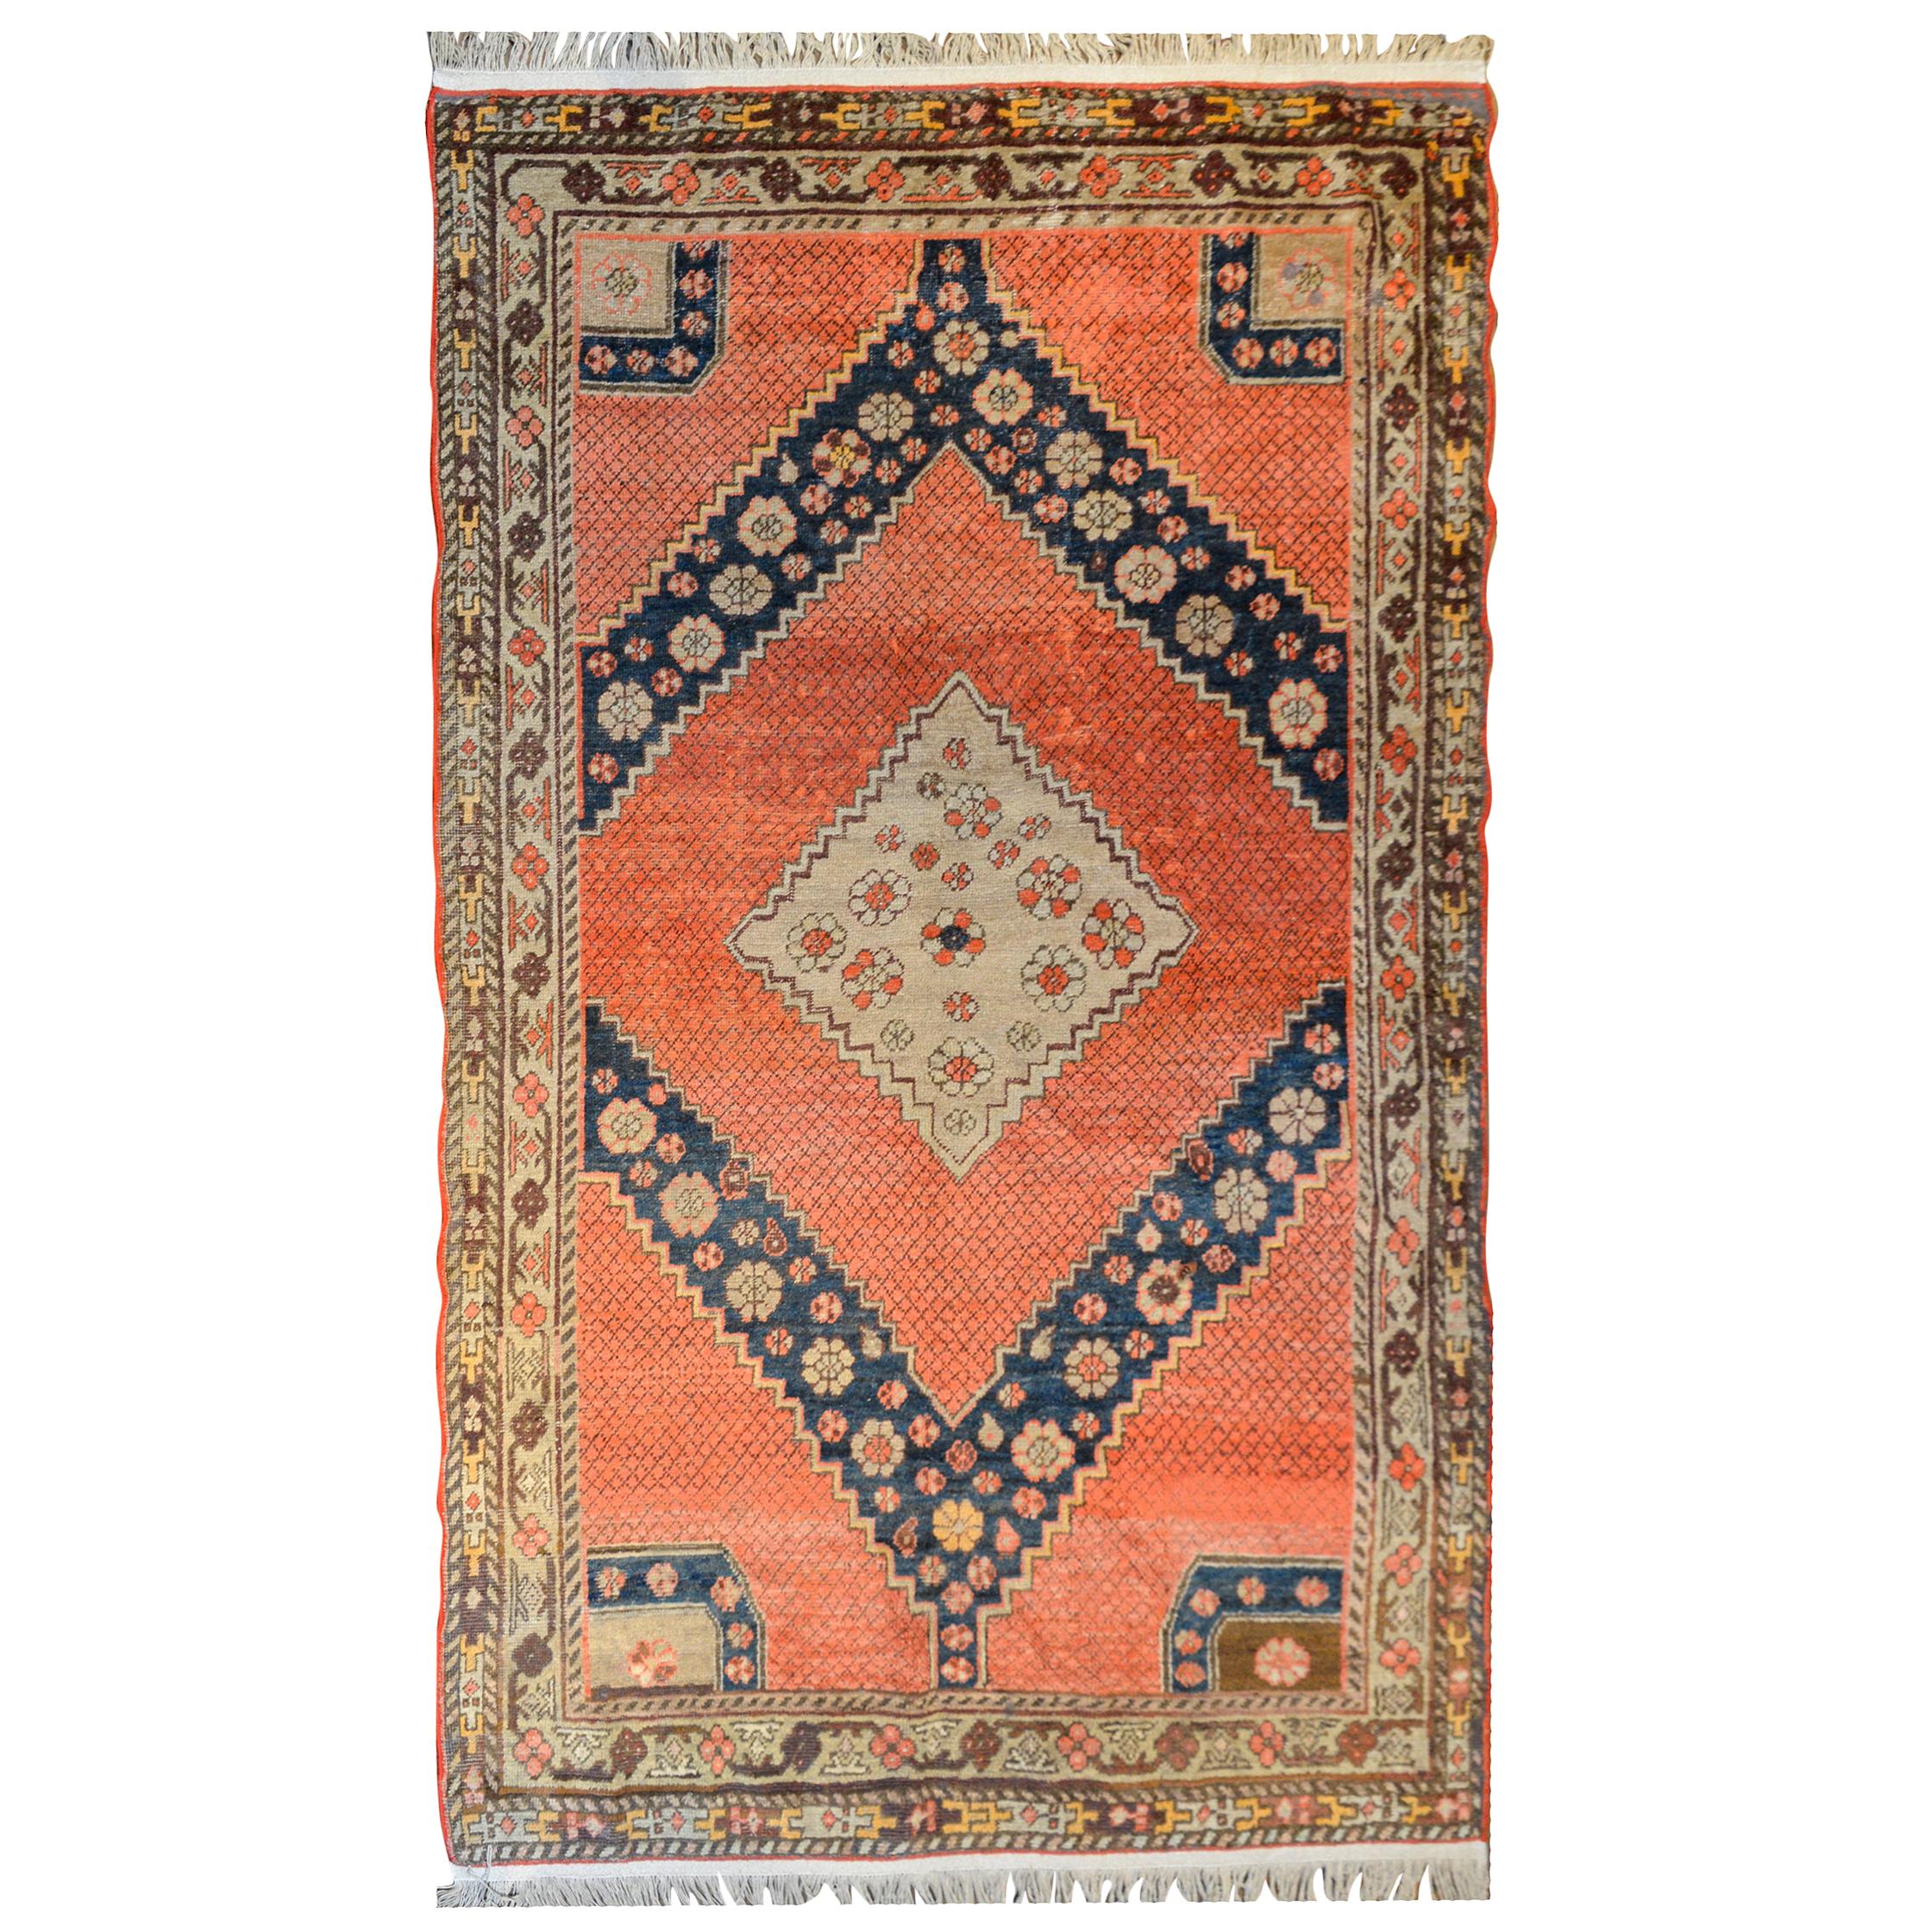 Mesmerizing Early 20th Century Samarkand Rug For Sale